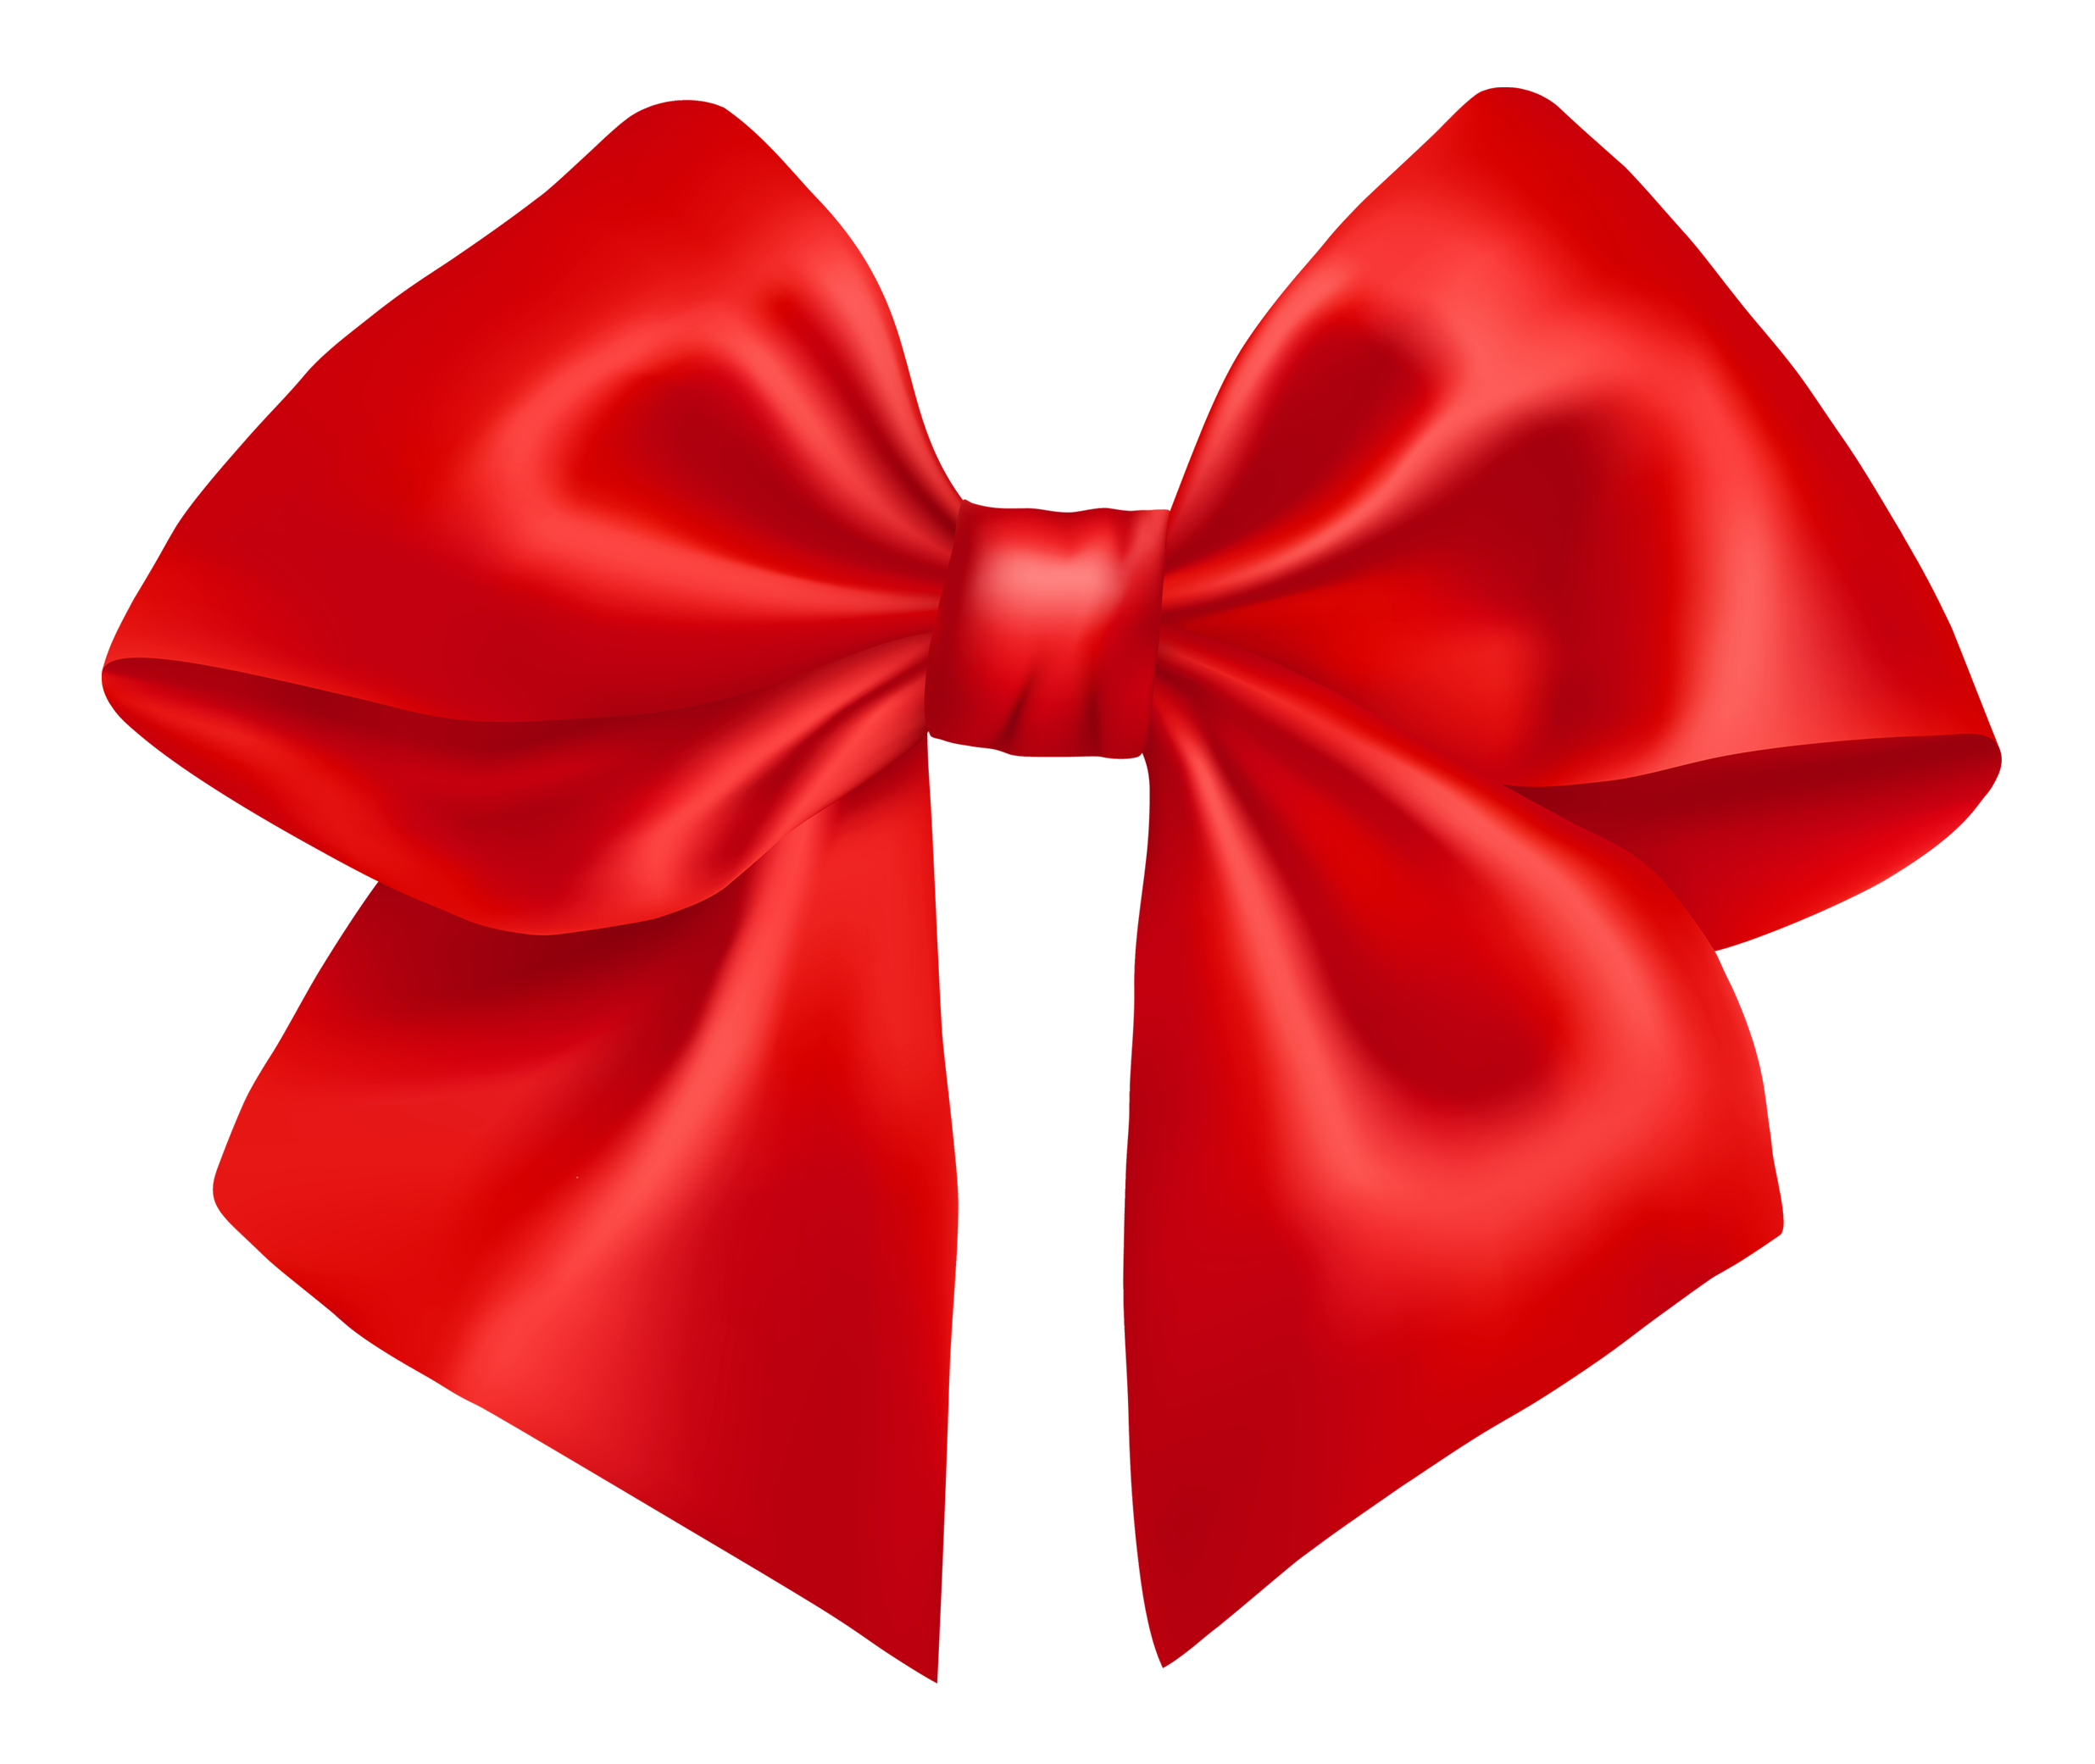 Red Christmas Bow Png Hd Transparent Red Christmas Bow Hdpng Images